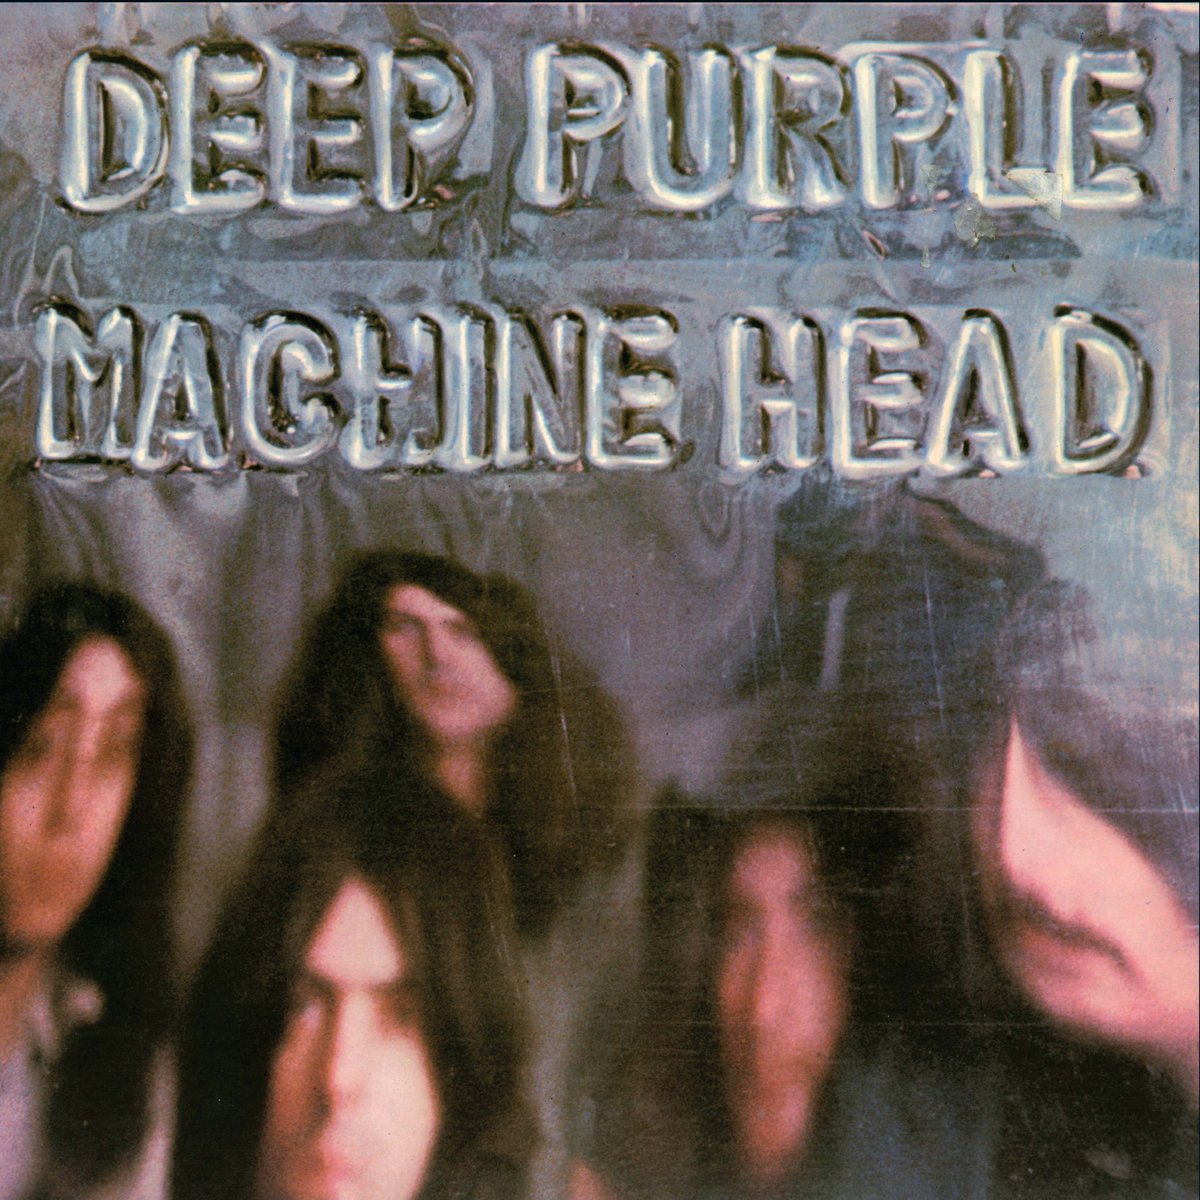 DEEP PURPLE Machine Head: Super Deluxe Edition is out now! 3-CD/LP/Blu-ray Set With Previously Unreleased Concert Recording, Multiple Mixes, And Remastered Sound! New Stereo And Dolby Atmos Mixes By Dweezil Zappa! Check it out over at rhino.com!